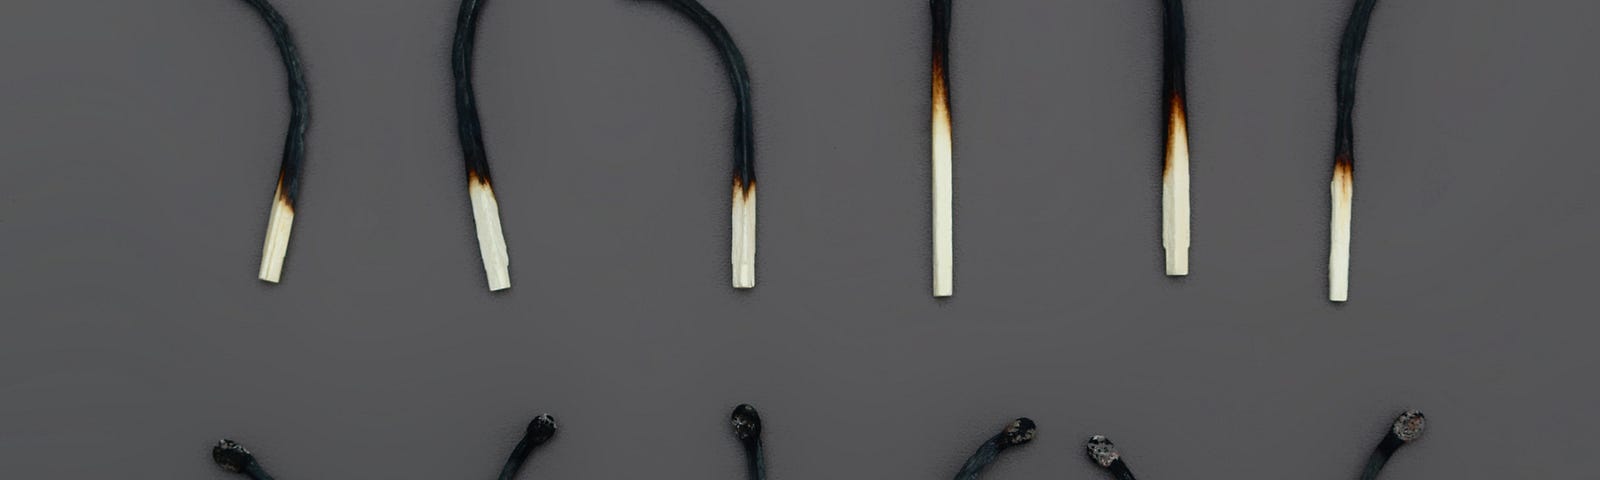 Two rows of matches burned about two thirds of the way down. They are laid out and bent in various directions against a charcoal gray background.